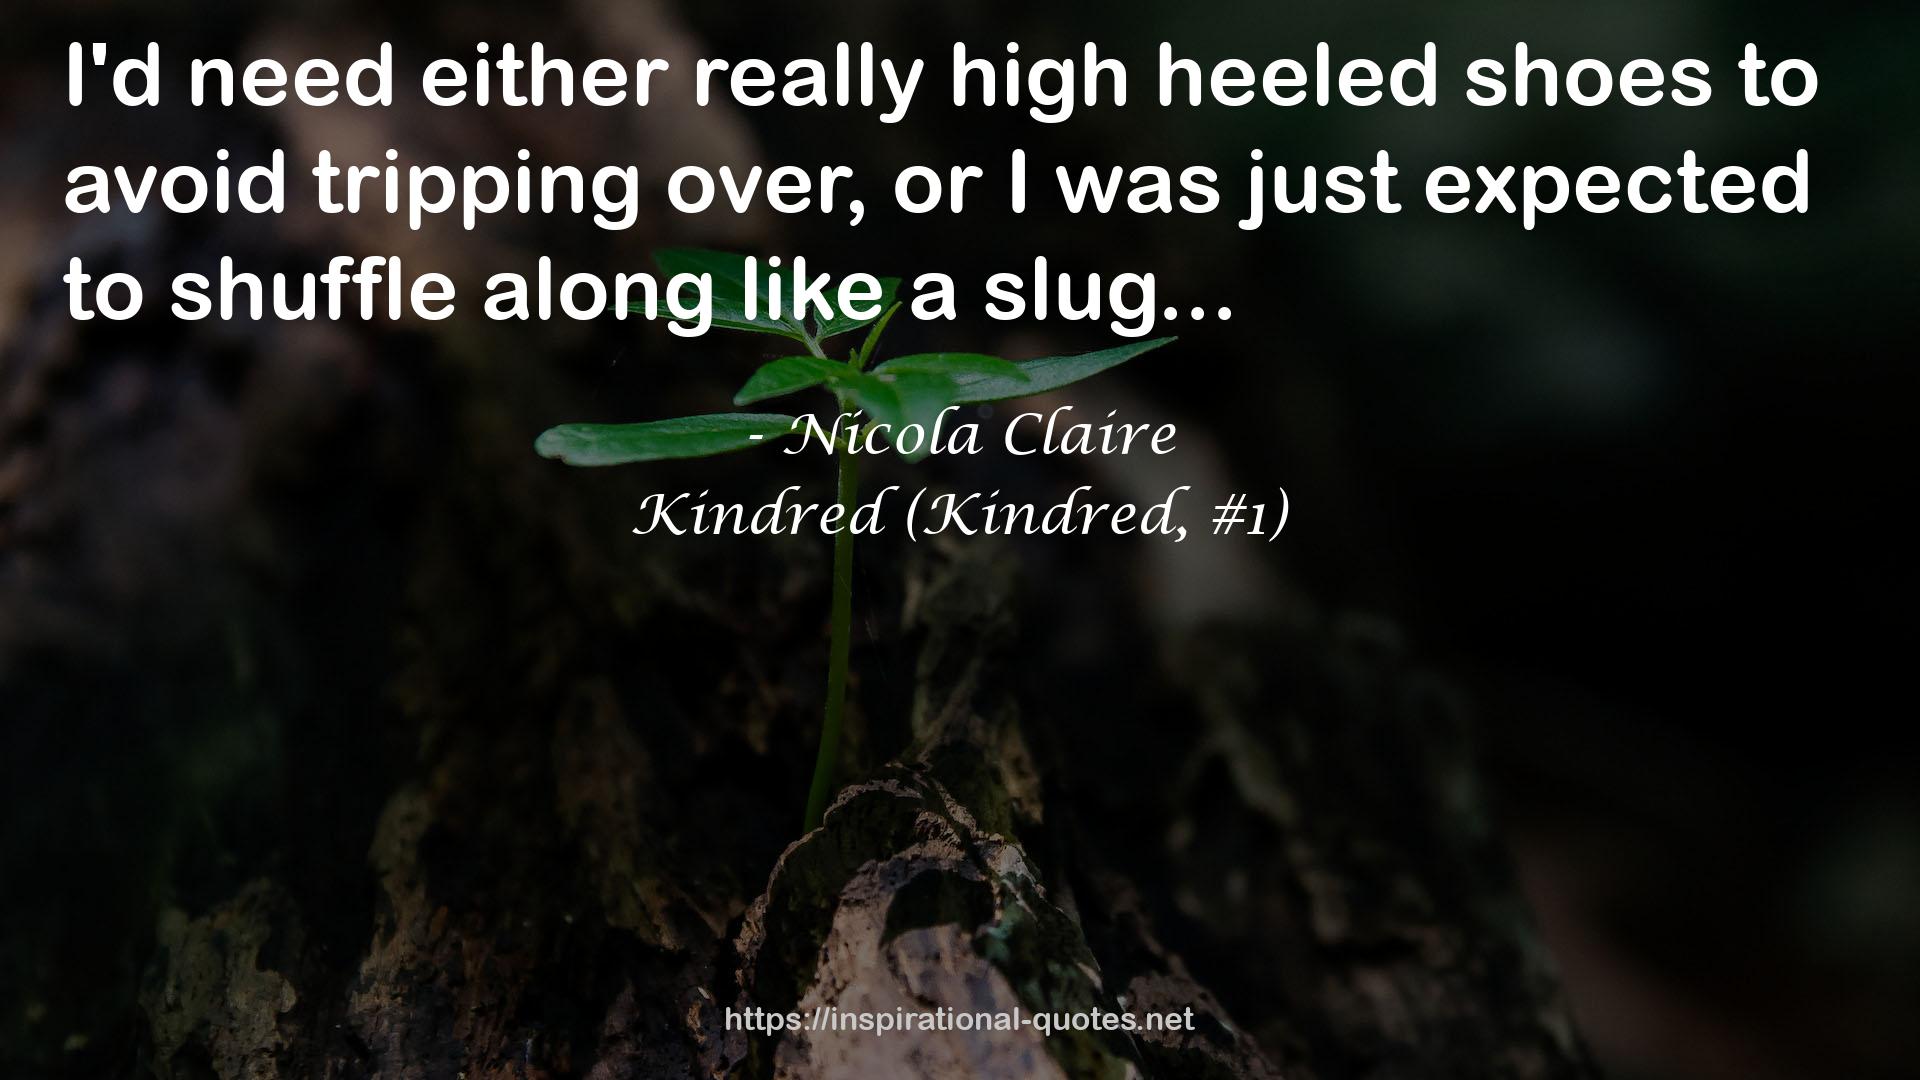 Kindred (Kindred, #1) QUOTES